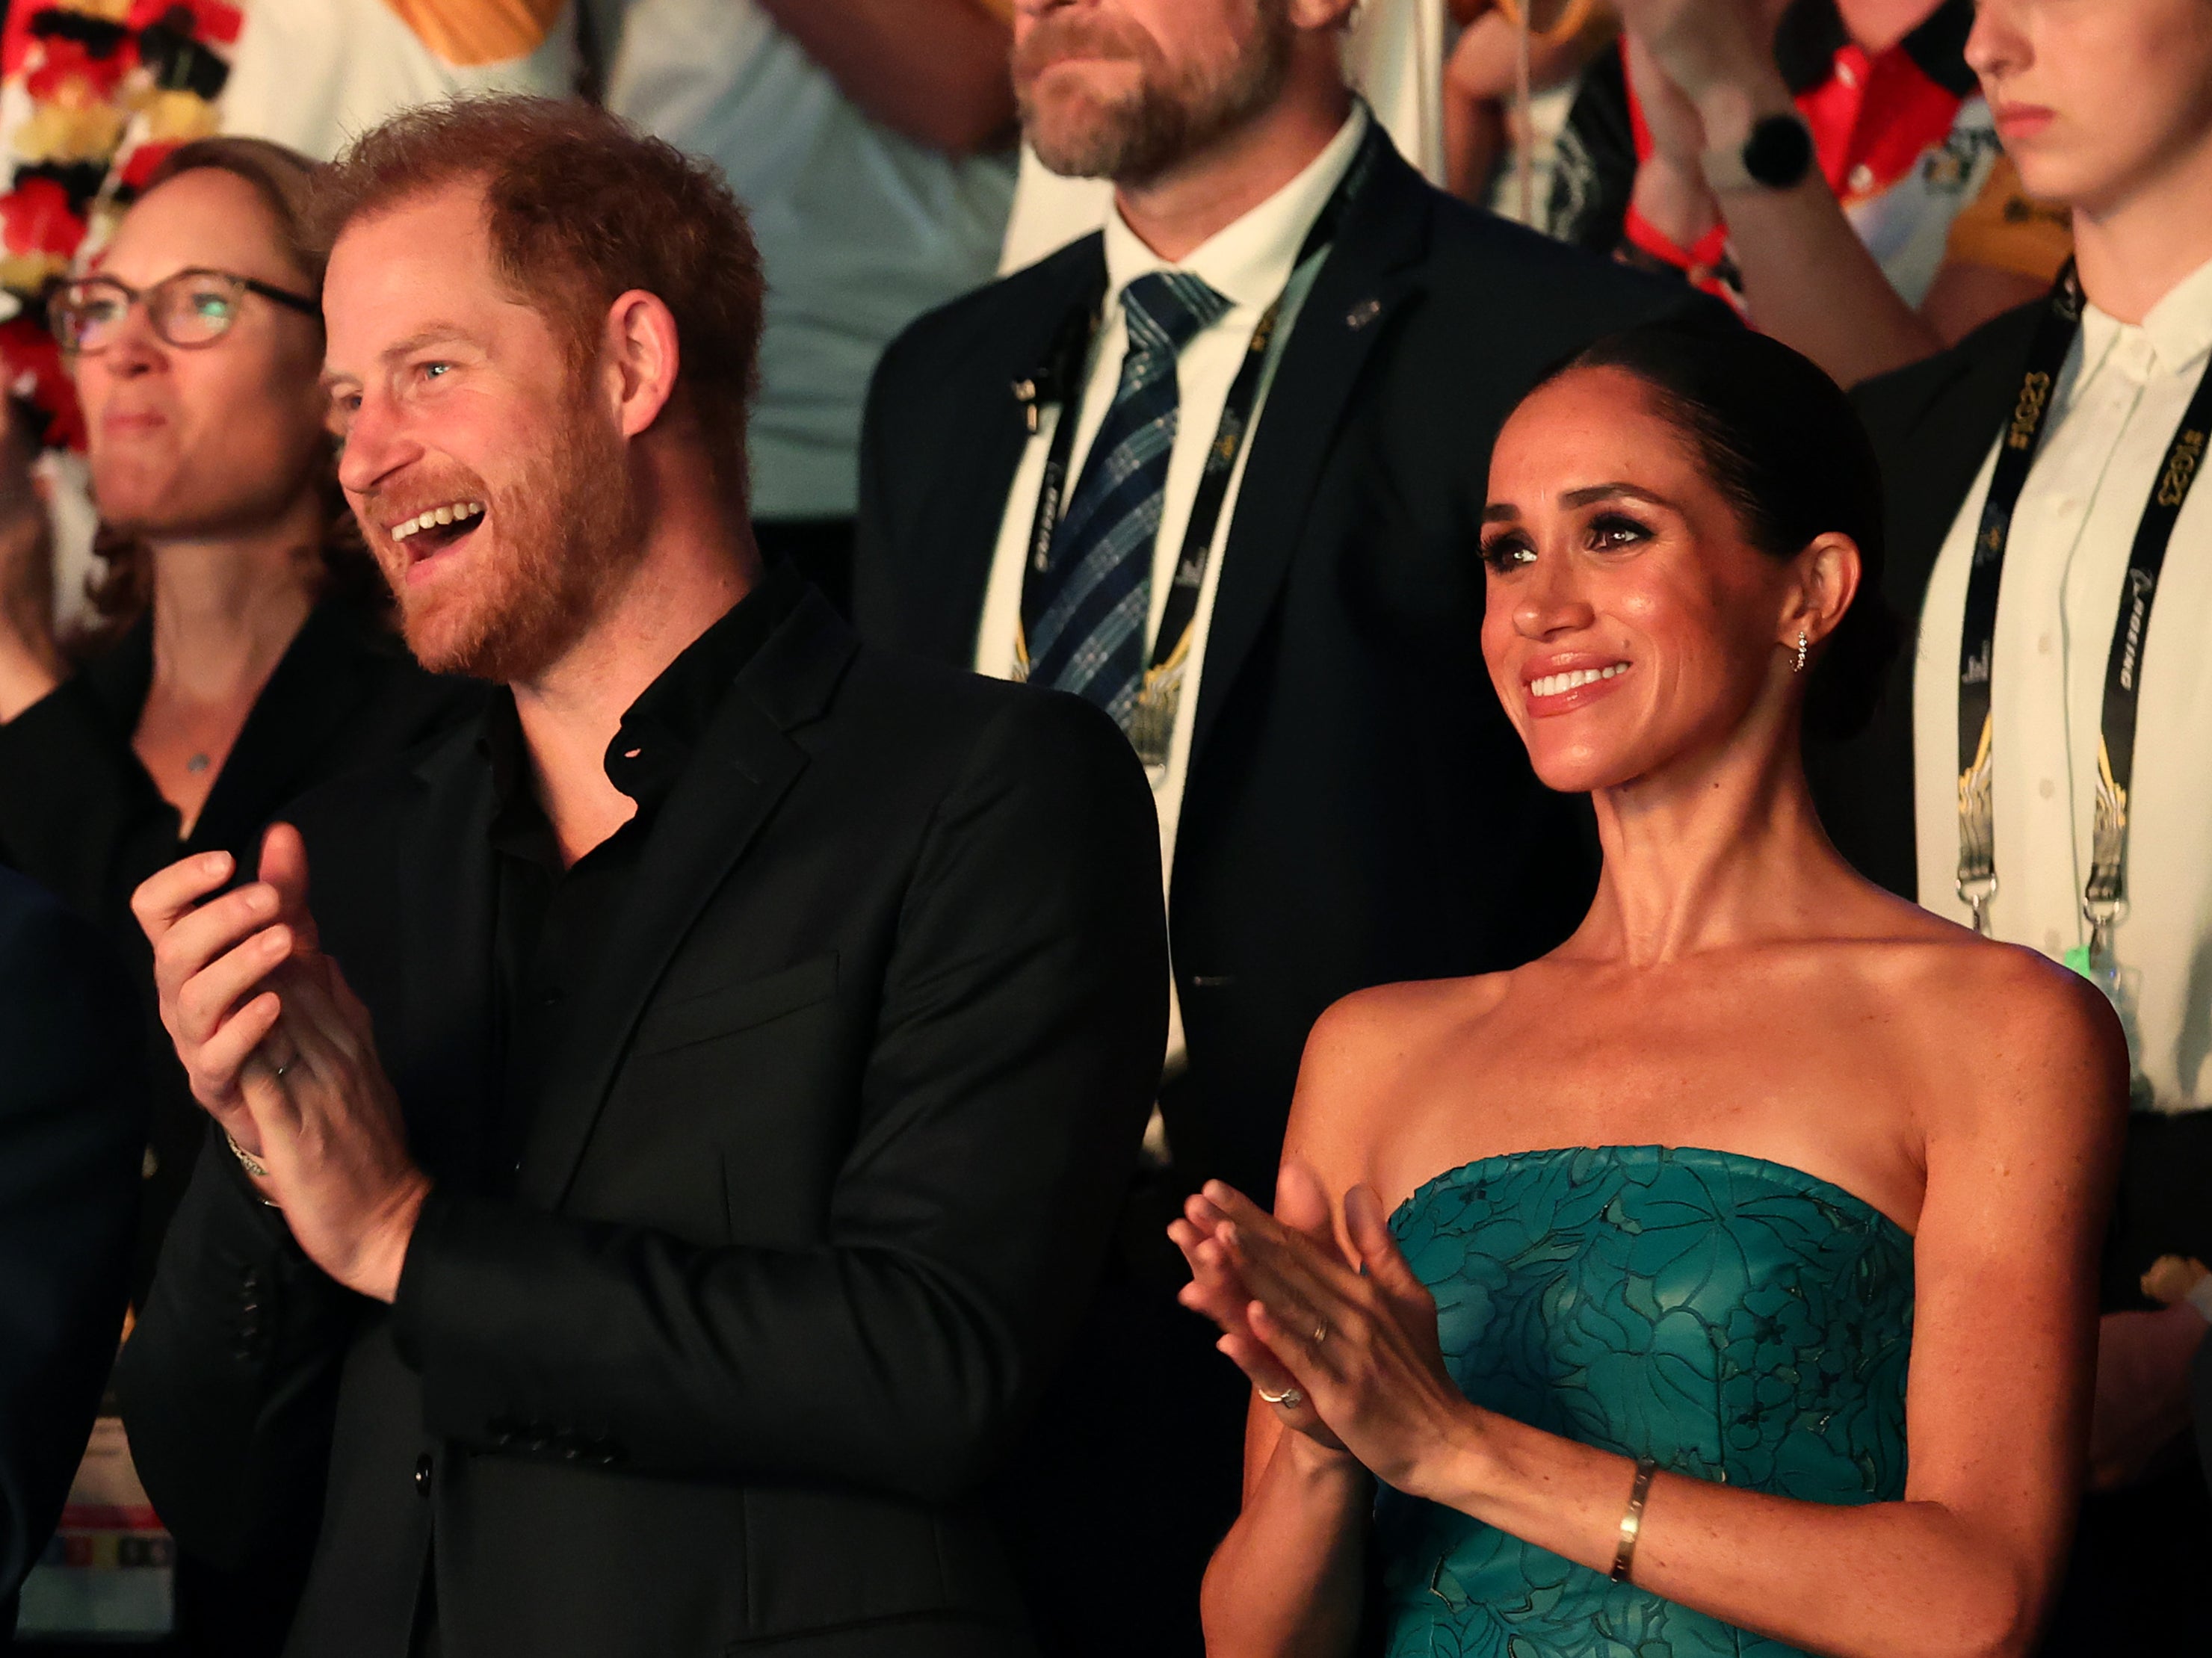 Duke and Duchess apparently used a private jet to travel to a concert